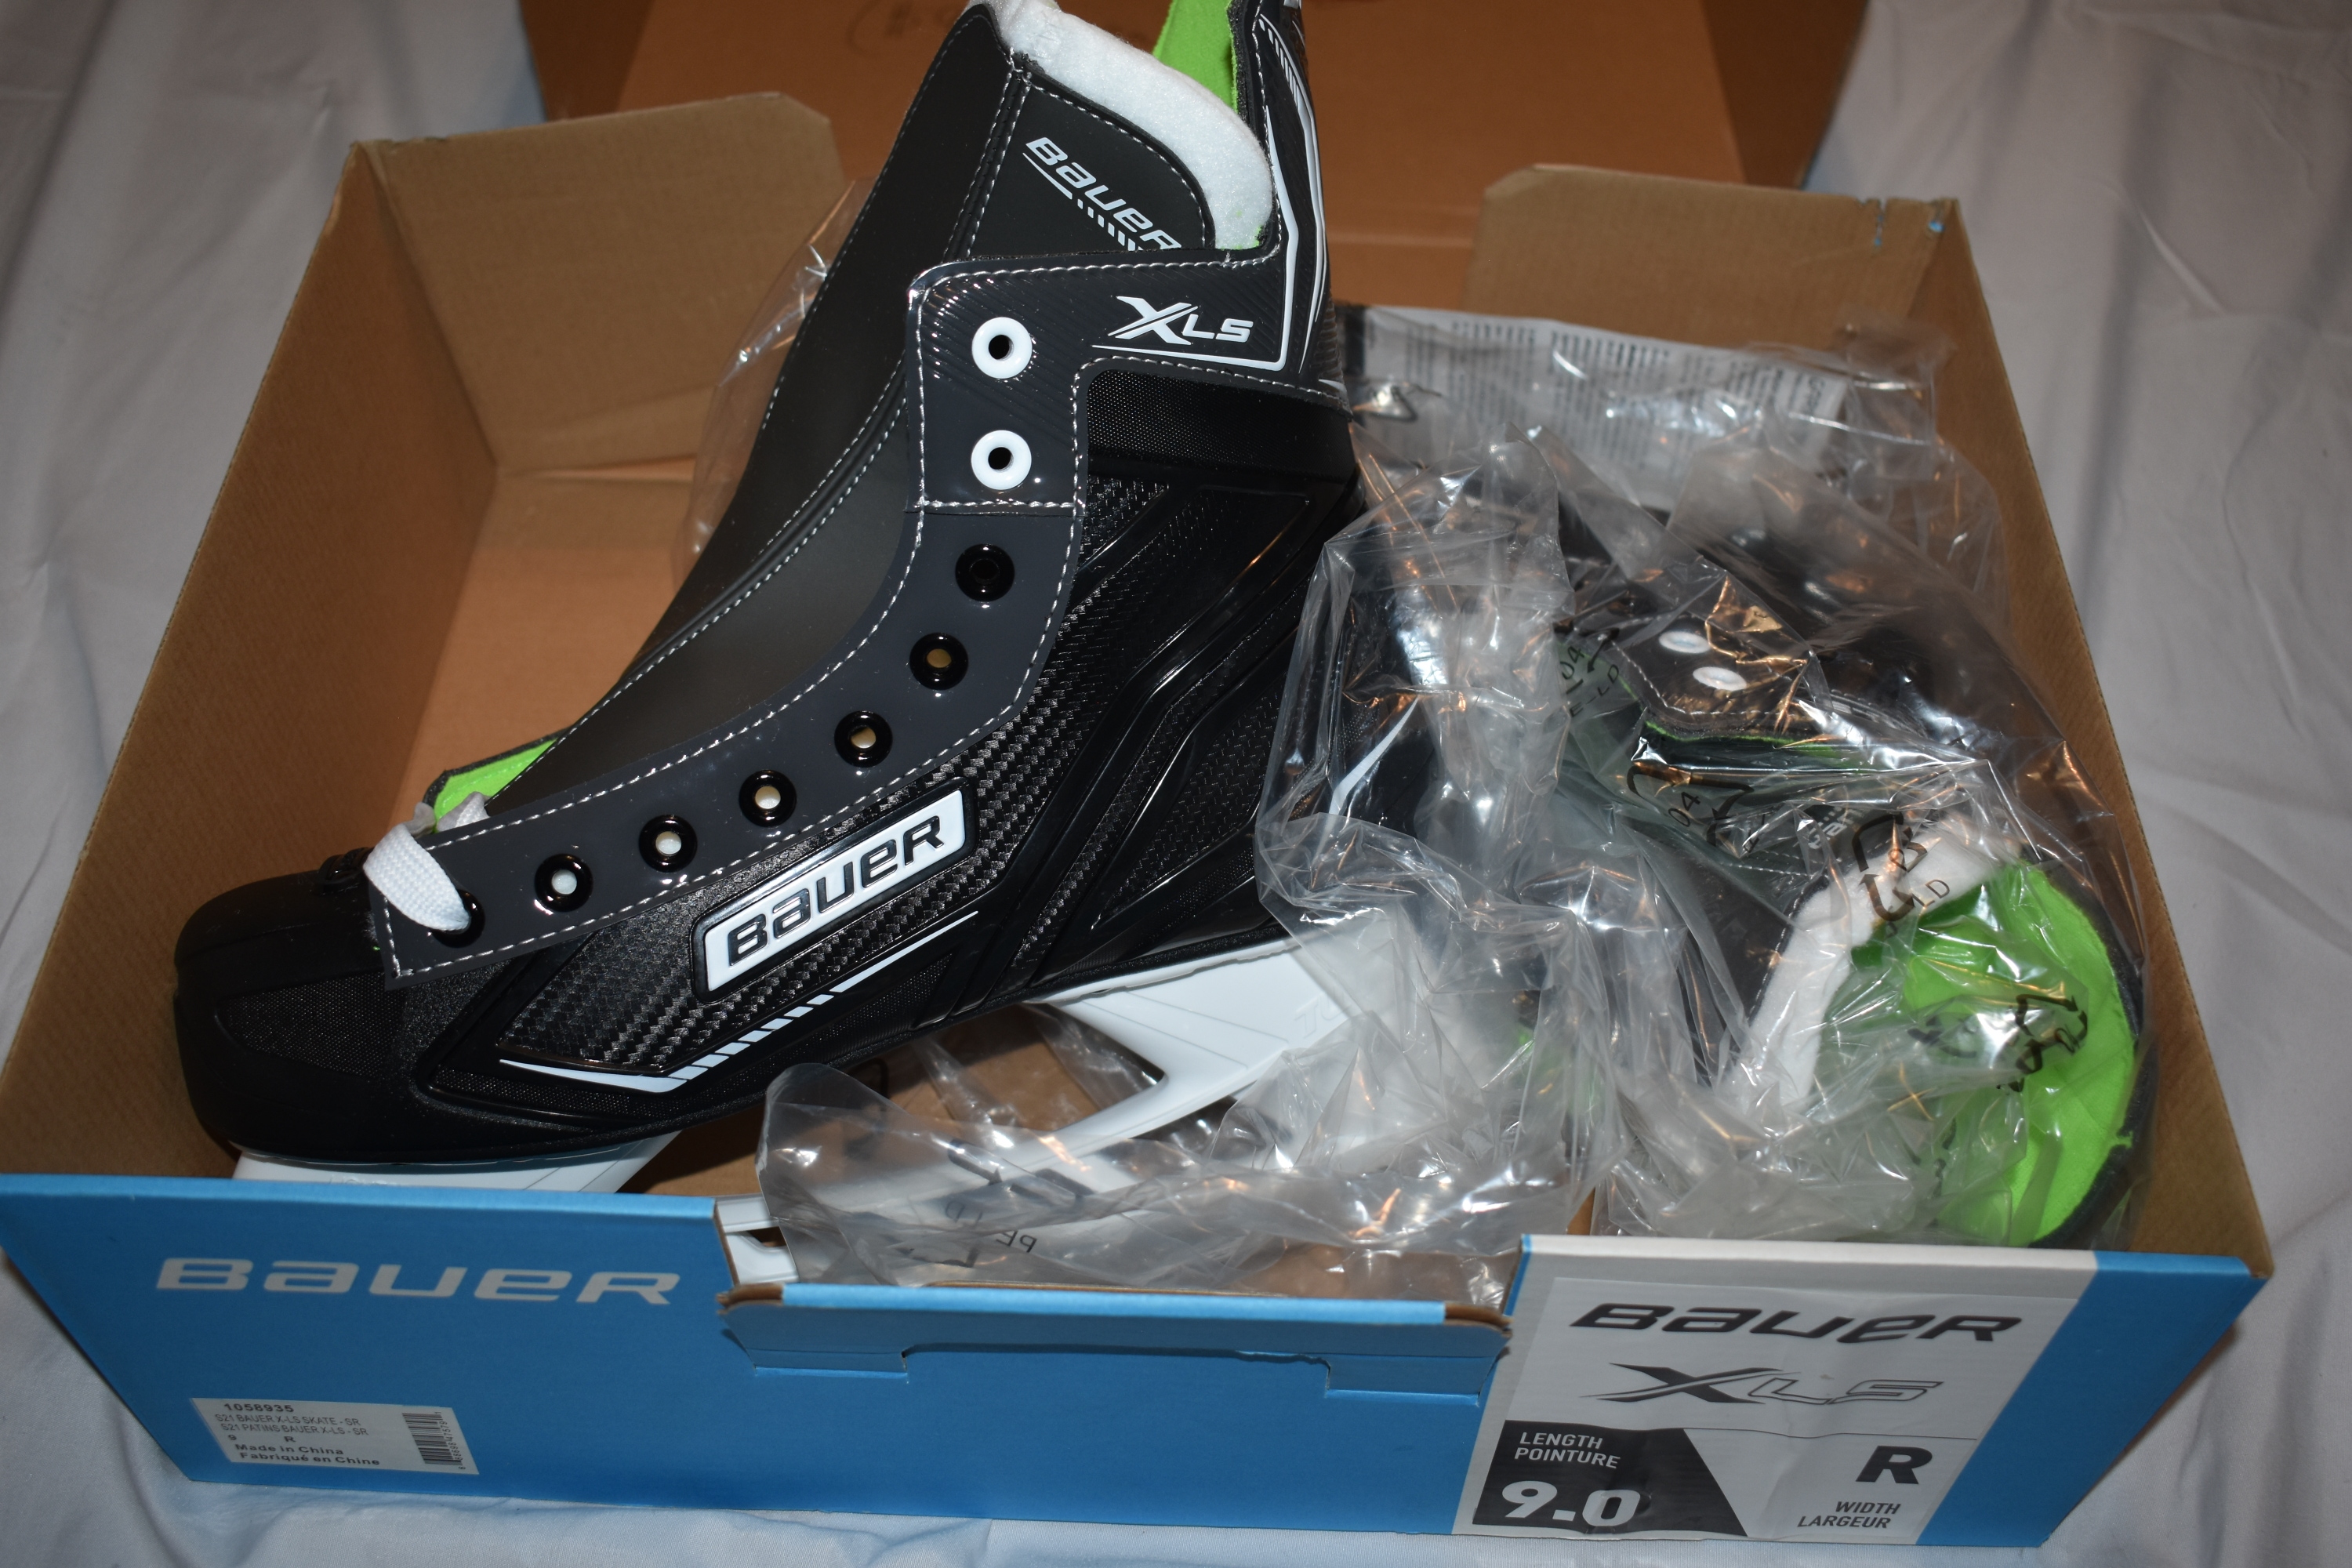 NEW - Bauer XLS Hockey Skates, Size 9R - In the Box!